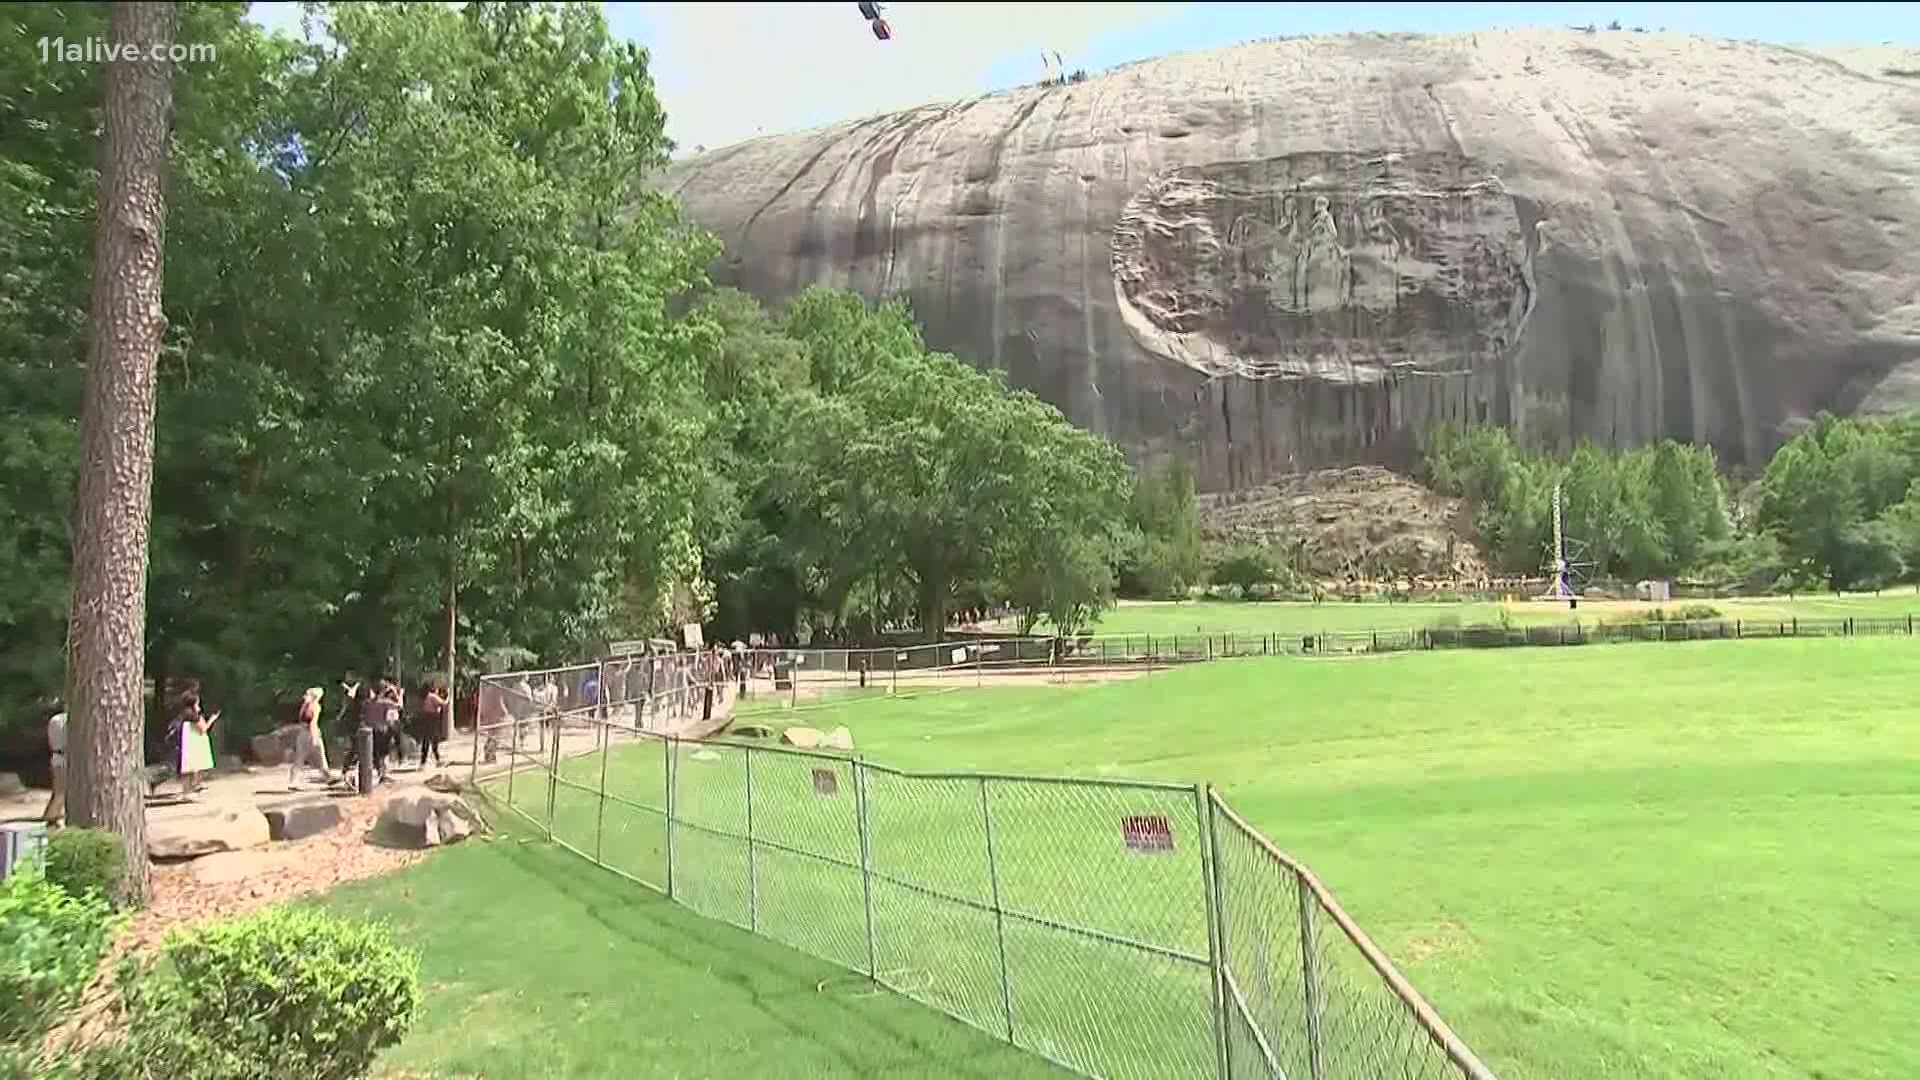 The park is expected to reopen on Sunday.